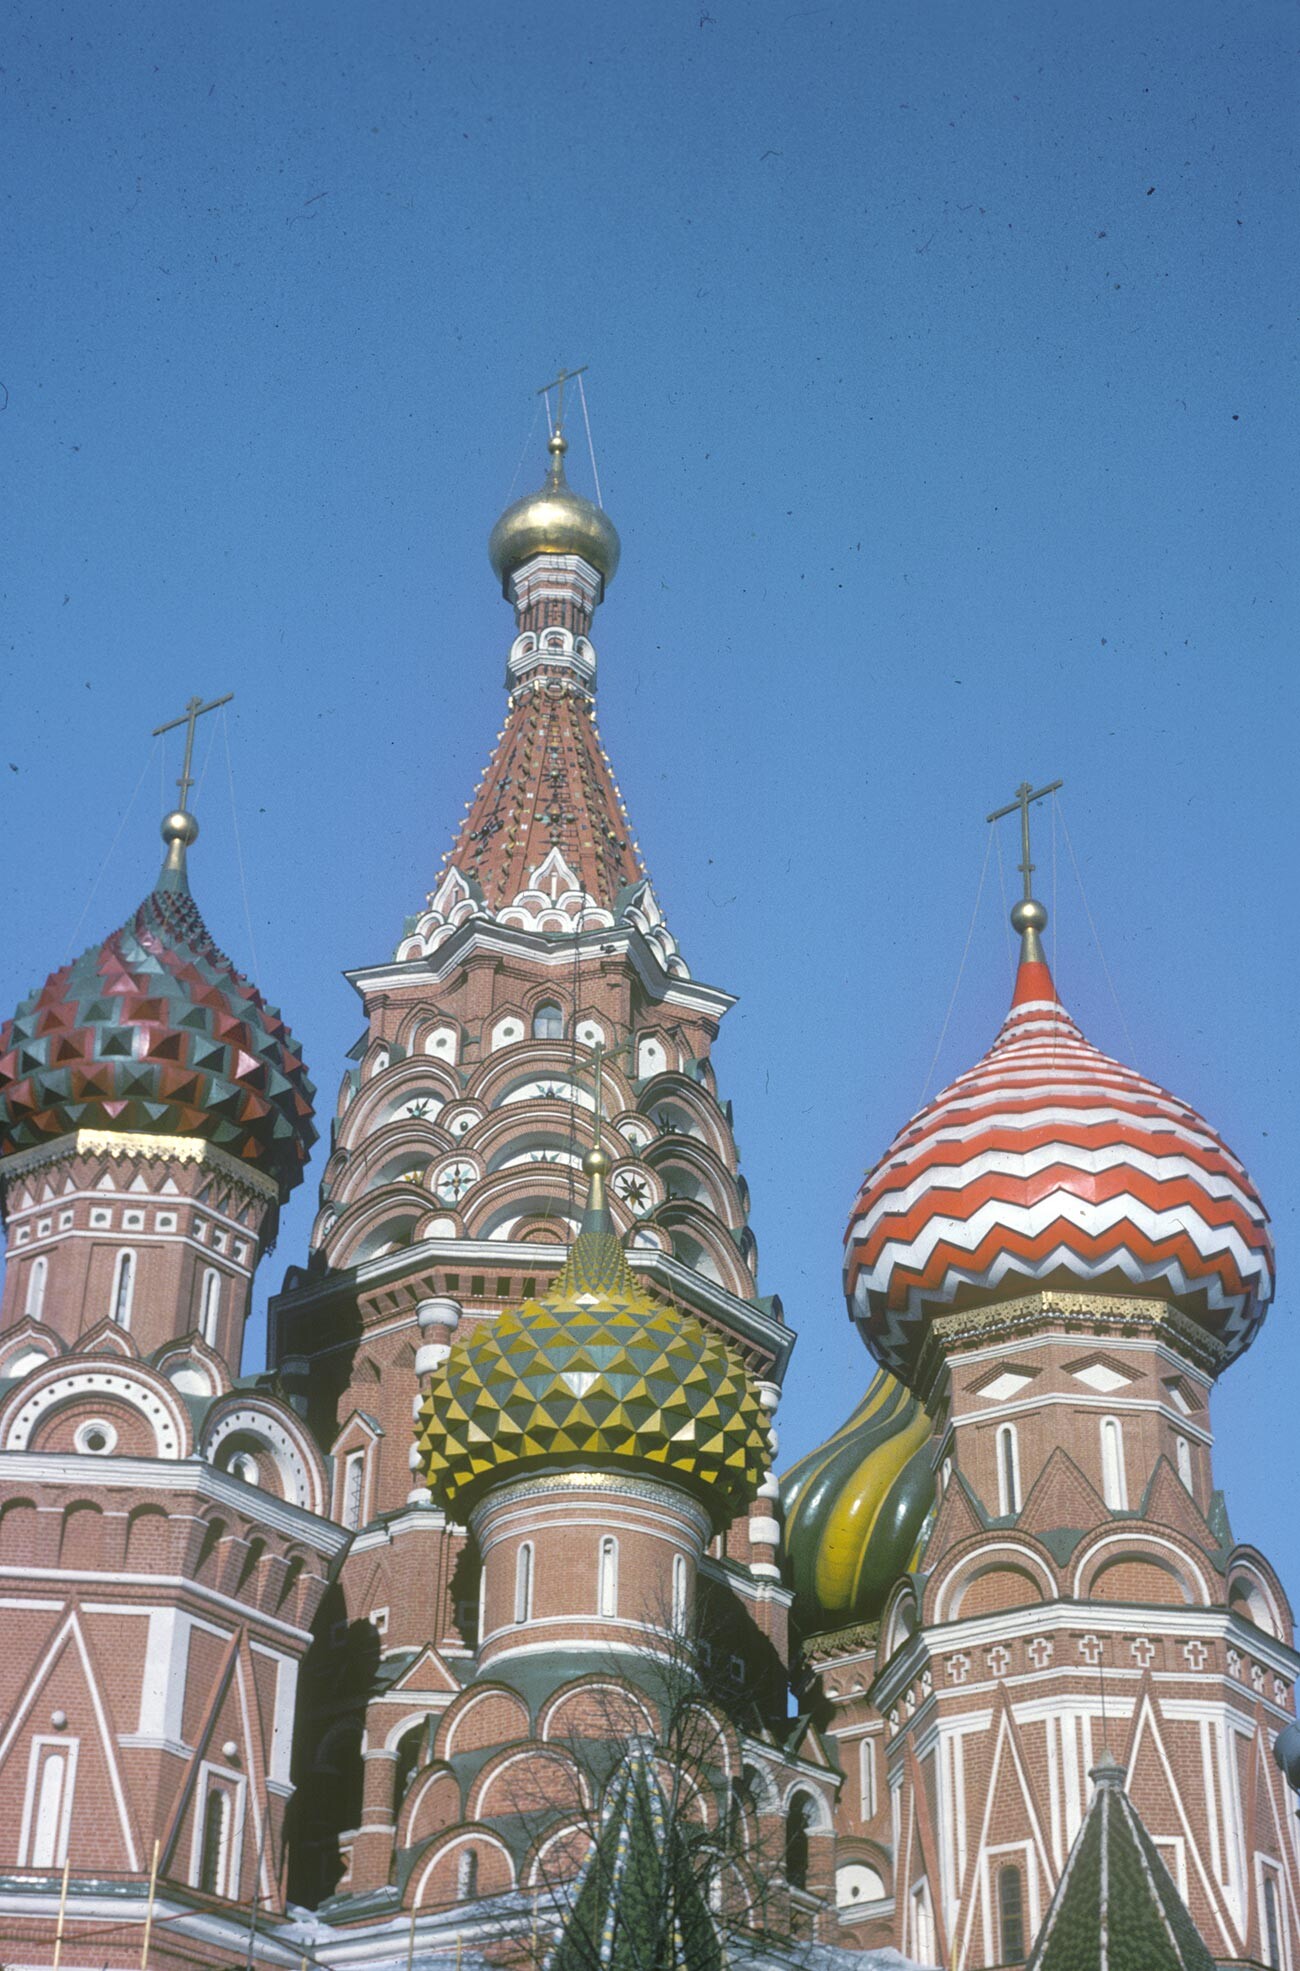 St. Basil's. Southwest view with central tower church dedicated to the Intercession of the Virgin. January 24, 1980